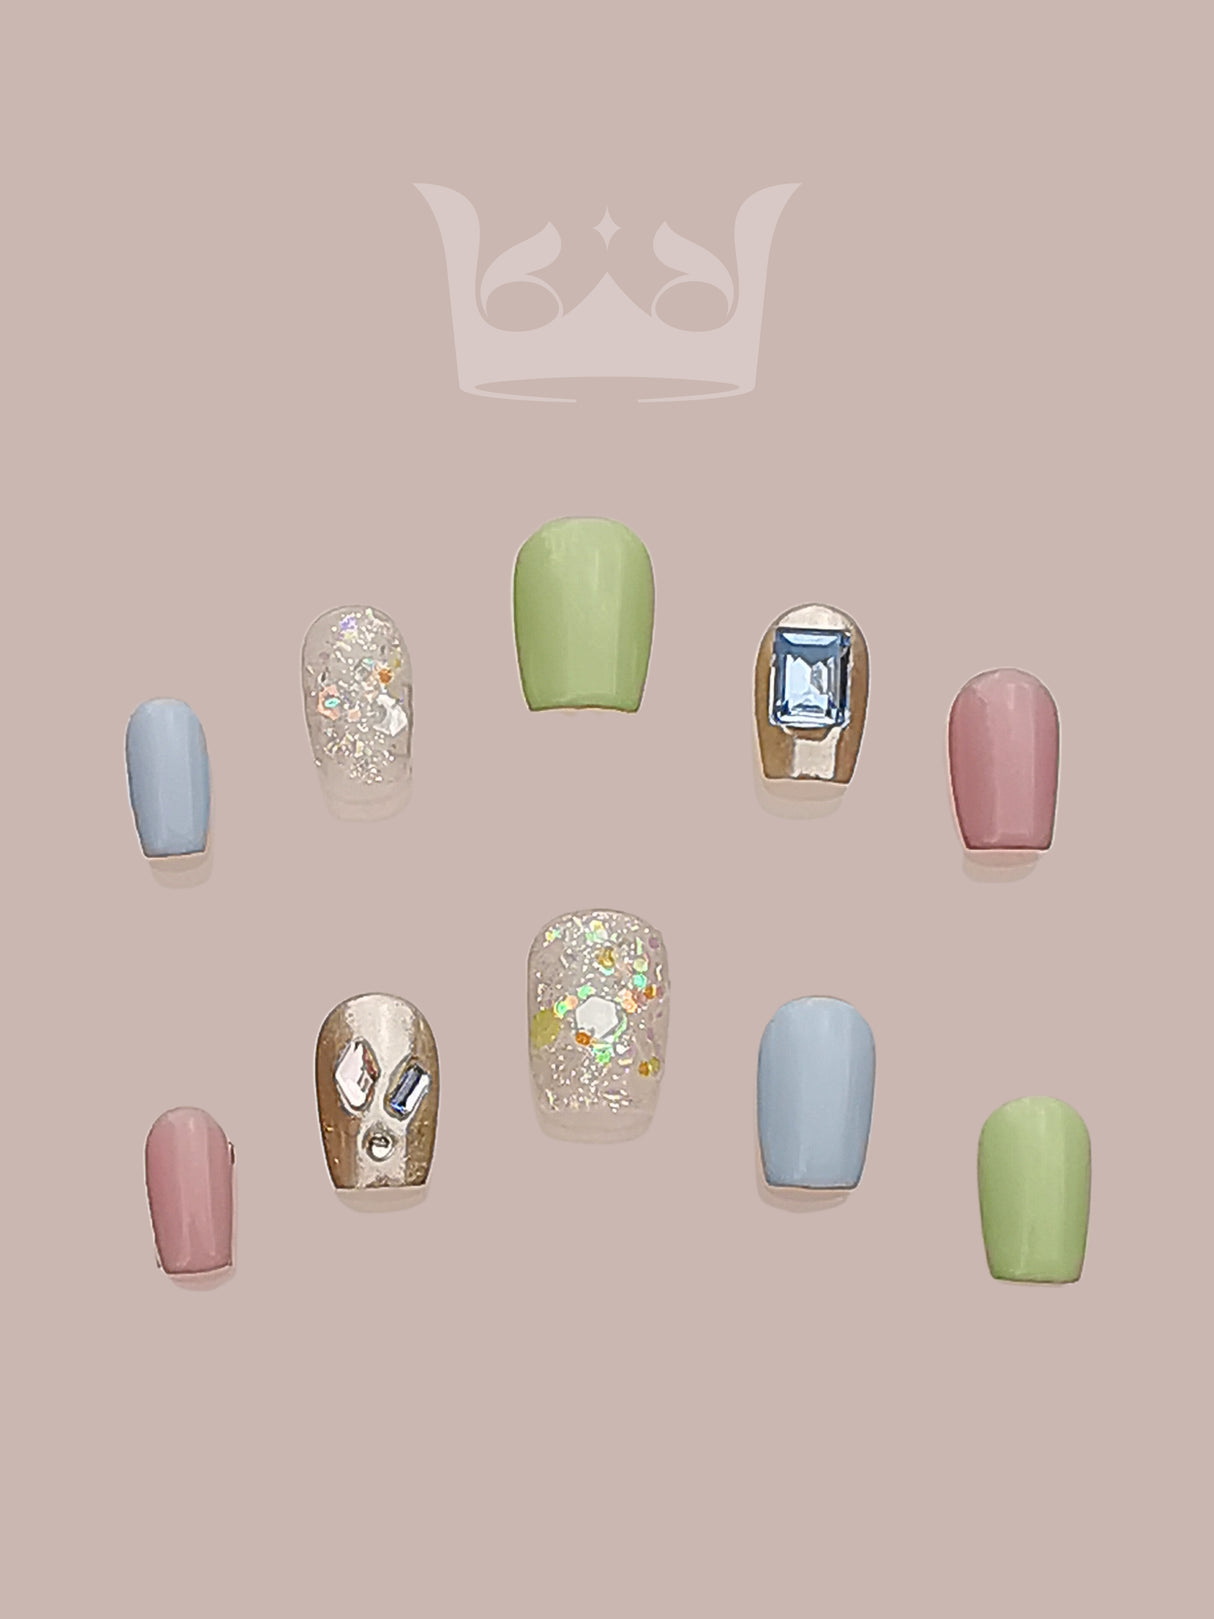 These acrylic nails come in various colors and designs, including glitter and floral decorations, and are for fashion or cosmetic purposes.